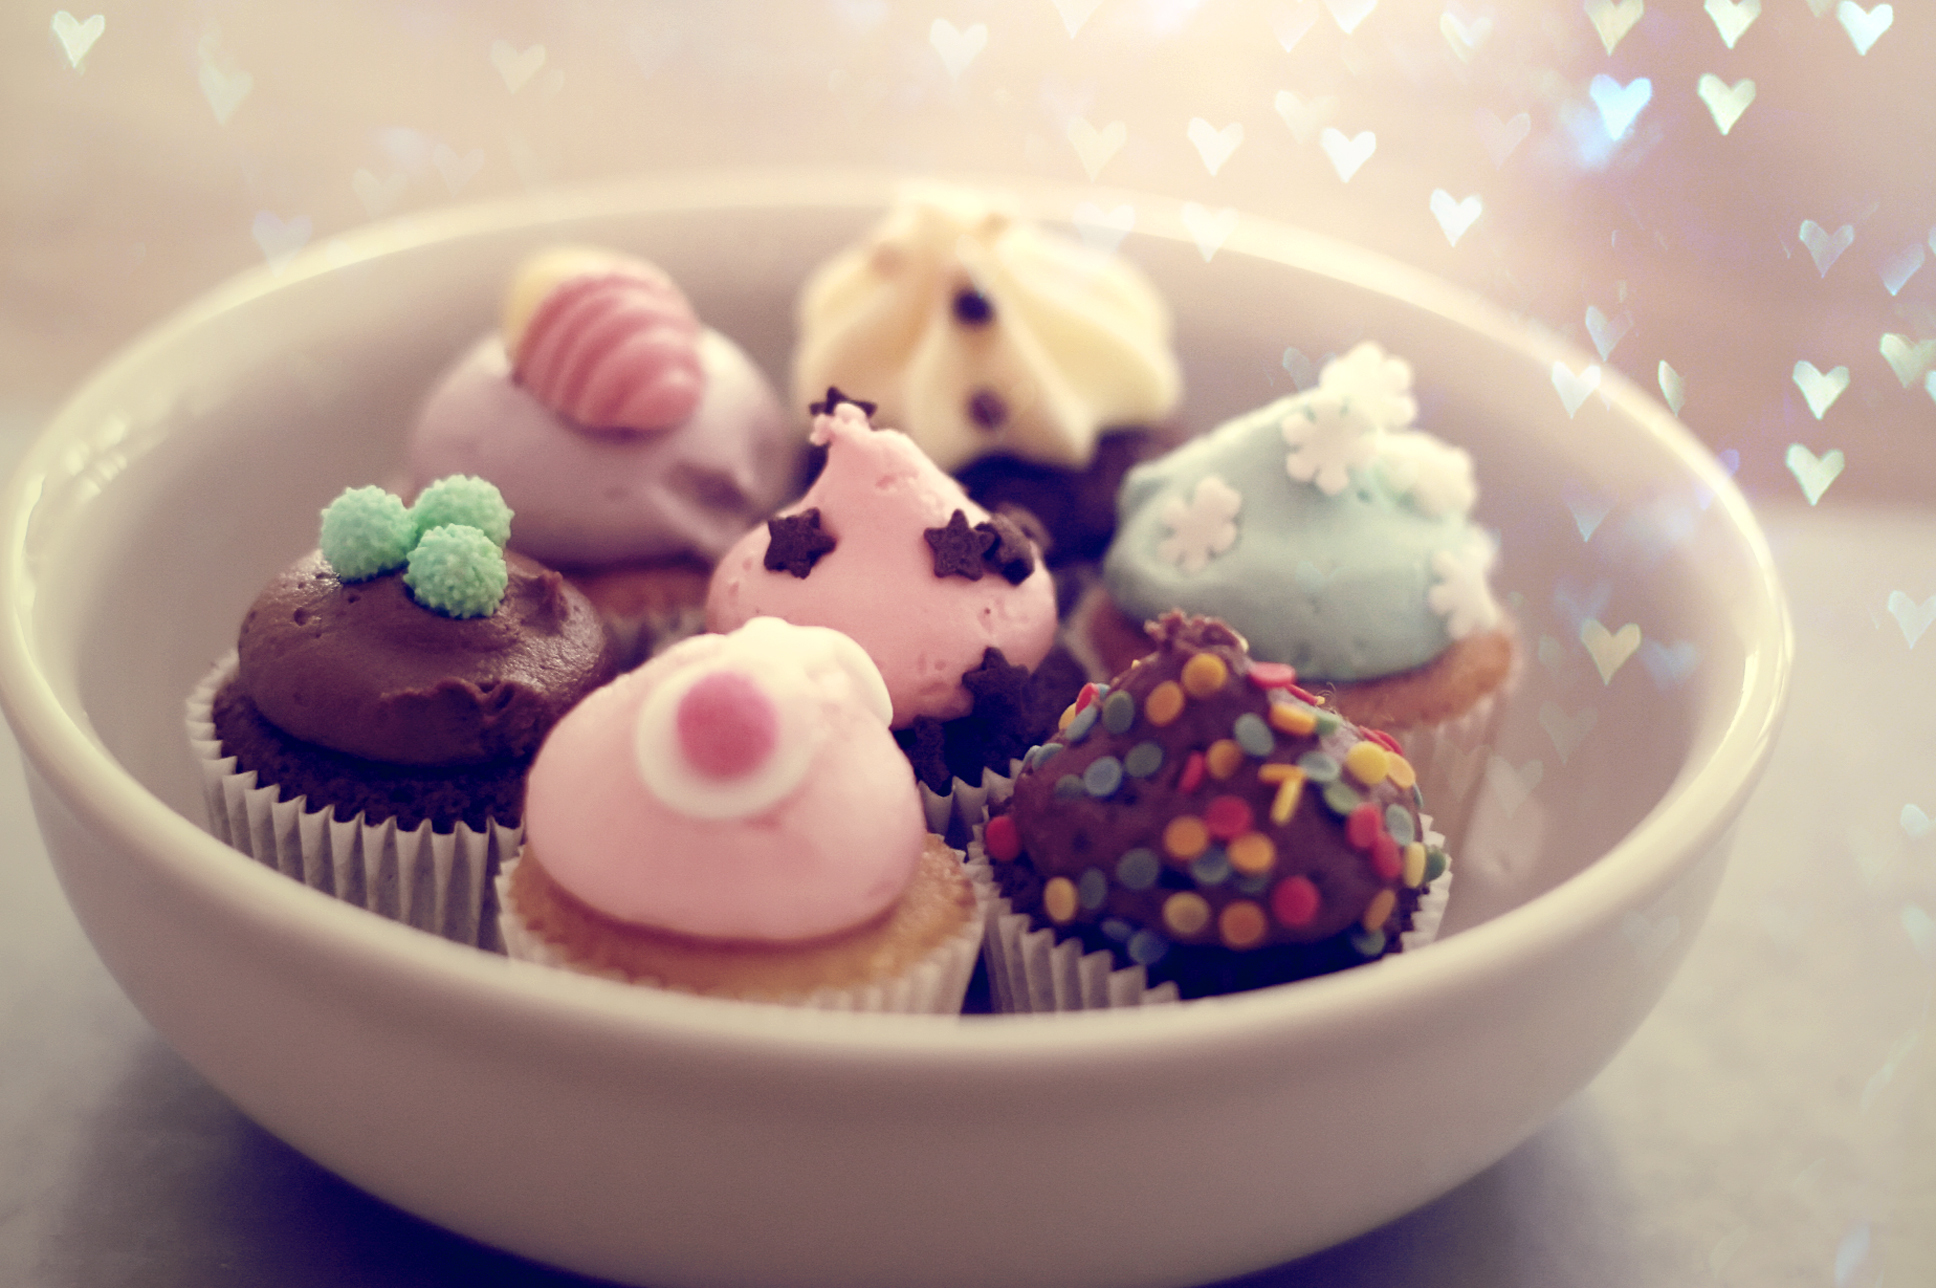 52337 download wallpaper desert, food, glare, plate, cakes, cupcakes screensavers and pictures for free